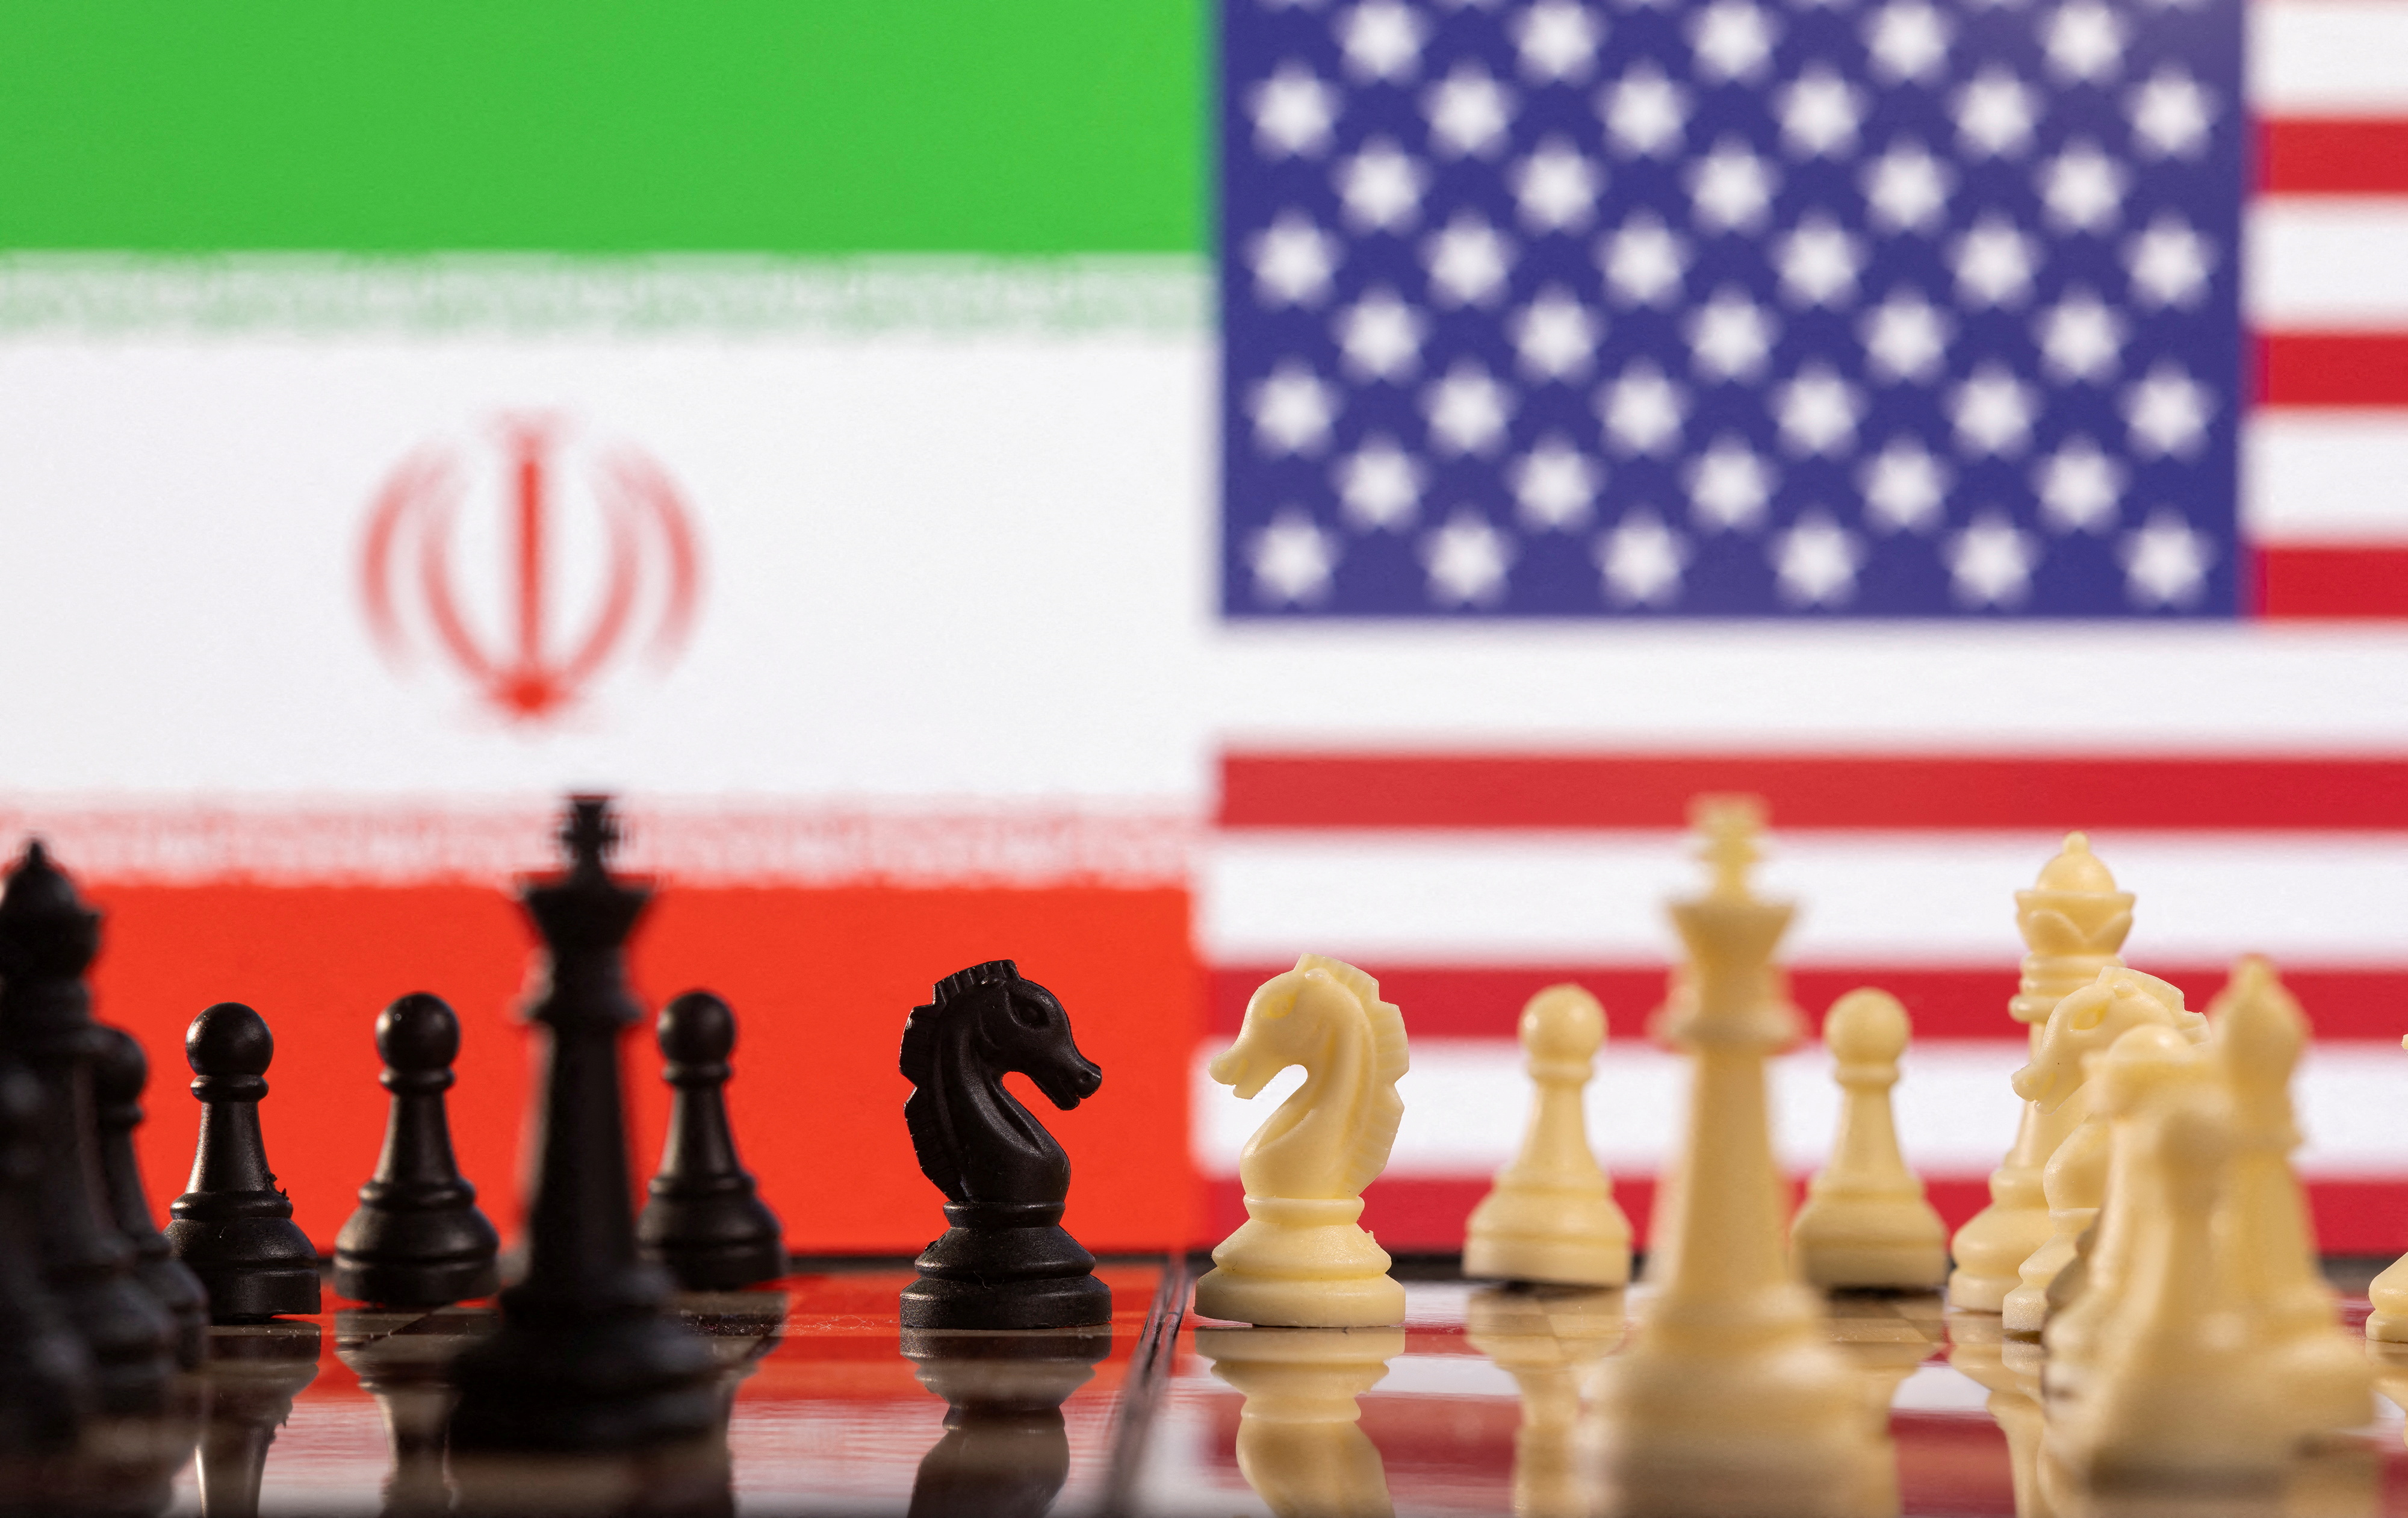 Chess pieces are seen in front of displayed Iran's and U.S. flags in this illustration taken January 25, 2022. REUTERS/Dado Ruvic/Illustration/